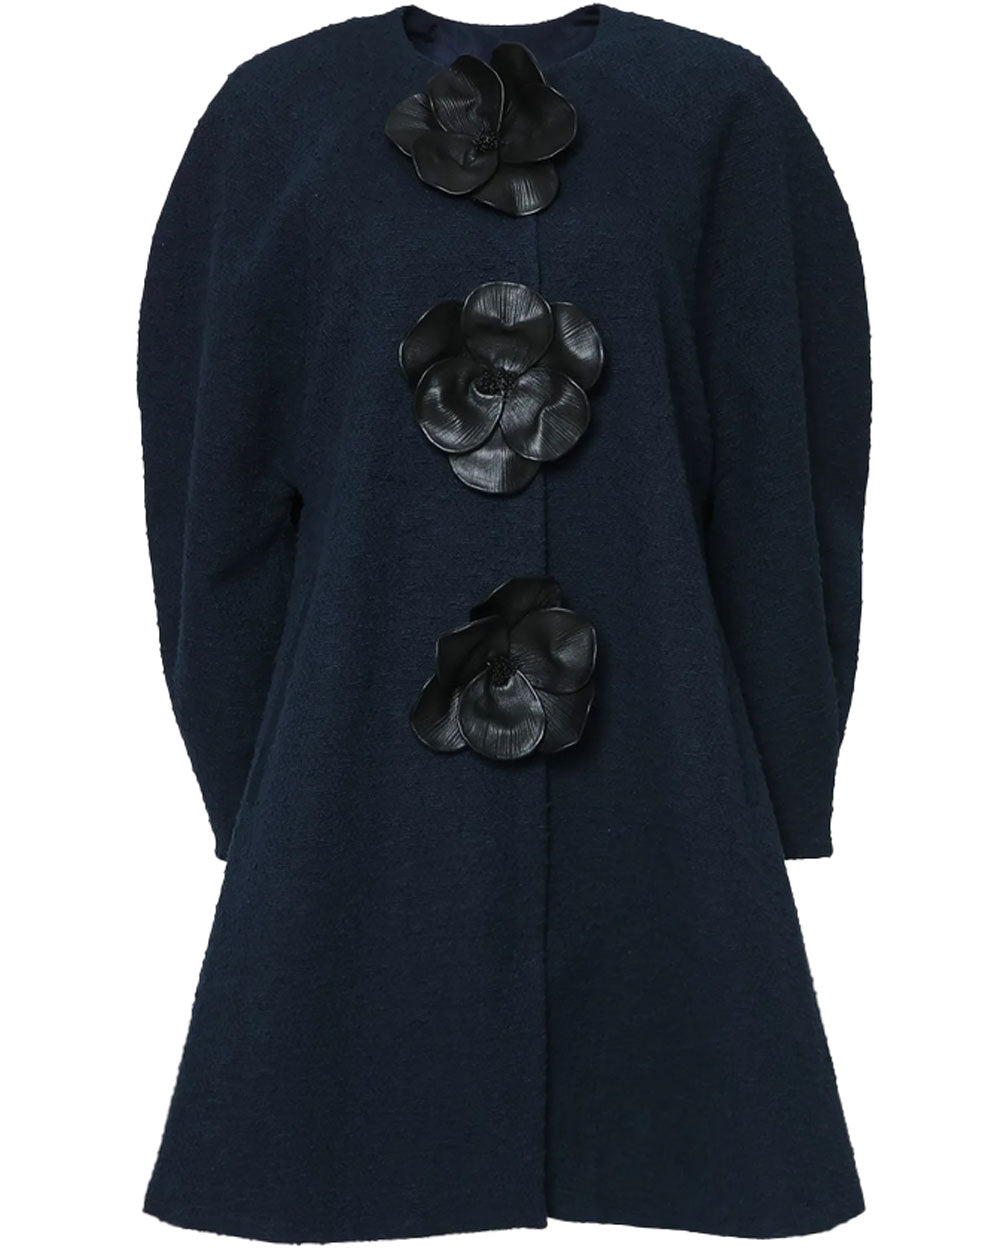 Midnight Boucle Floral A line Coat